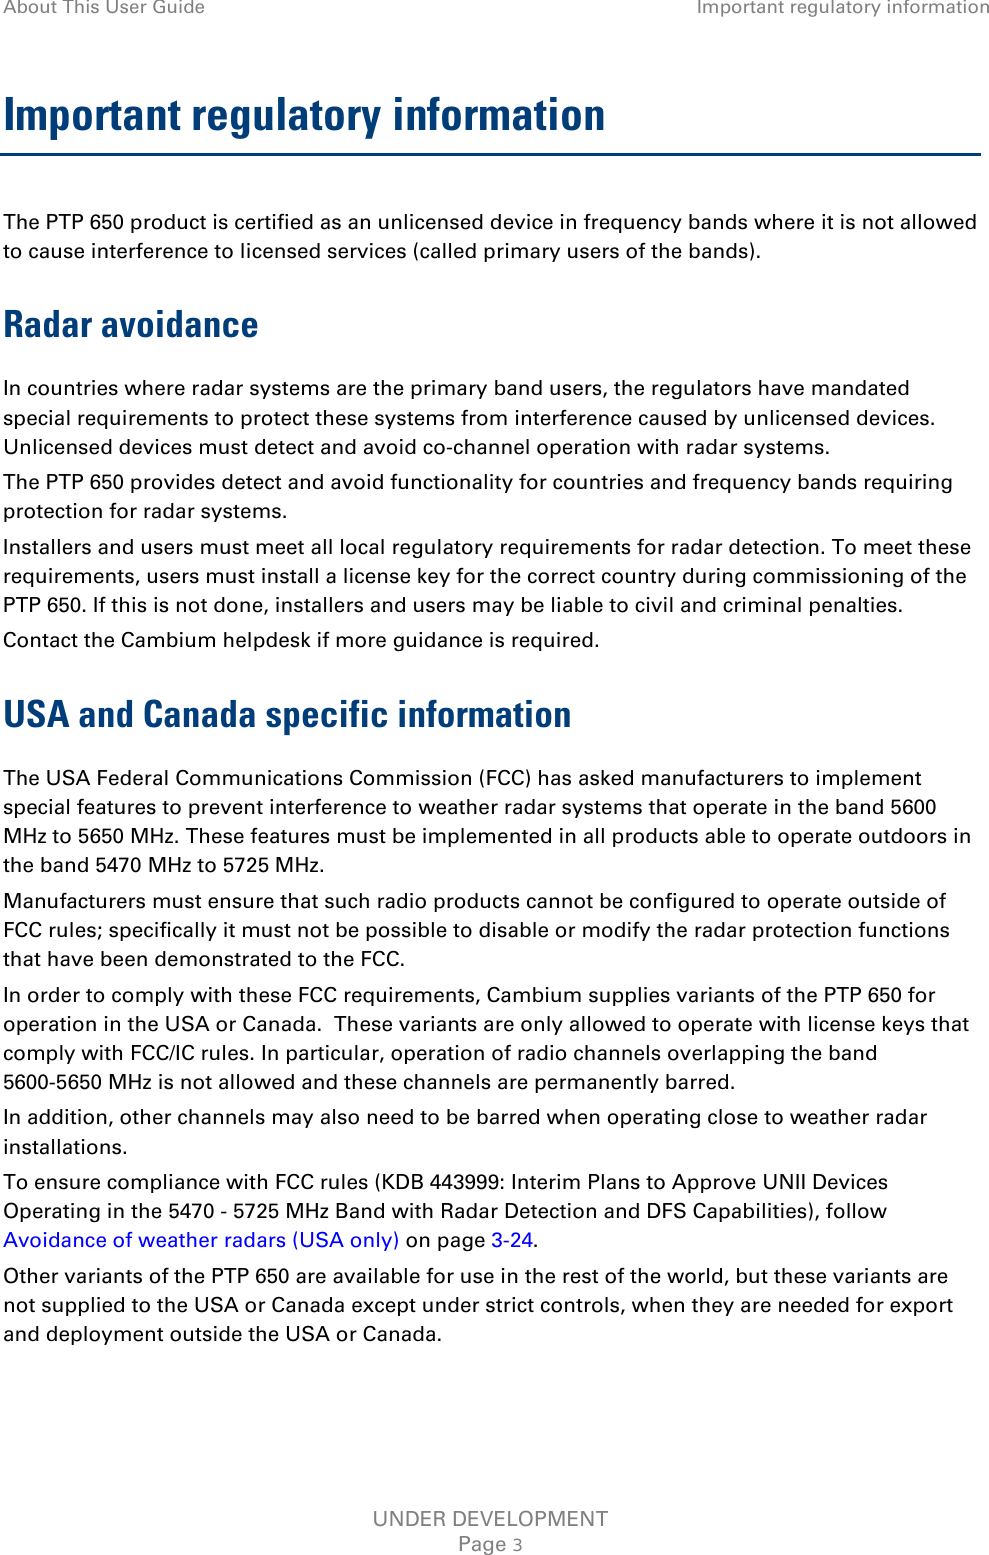 About This User Guide Important regulatory information  Important regulatory information The PTP 650 product is certified as an unlicensed device in frequency bands where it is not allowed to cause interference to licensed services (called primary users of the bands). Radar avoidance In countries where radar systems are the primary band users, the regulators have mandated special requirements to protect these systems from interference caused by unlicensed devices.  Unlicensed devices must detect and avoid co-channel operation with radar systems.  The PTP 650 provides detect and avoid functionality for countries and frequency bands requiring protection for radar systems. Installers and users must meet all local regulatory requirements for radar detection. To meet these requirements, users must install a license key for the correct country during commissioning of the PTP 650. If this is not done, installers and users may be liable to civil and criminal penalties. Contact the Cambium helpdesk if more guidance is required. USA and Canada specific information The USA Federal Communications Commission (FCC) has asked manufacturers to implement special features to prevent interference to weather radar systems that operate in the band 5600 MHz to 5650 MHz. These features must be implemented in all products able to operate outdoors in the band 5470 MHz to 5725 MHz. Manufacturers must ensure that such radio products cannot be configured to operate outside of FCC rules; specifically it must not be possible to disable or modify the radar protection functions that have been demonstrated to the FCC. In order to comply with these FCC requirements, Cambium supplies variants of the PTP 650 for operation in the USA or Canada.  These variants are only allowed to operate with license keys that comply with FCC/IC rules. In particular, operation of radio channels overlapping the band 5600-5650 MHz is not allowed and these channels are permanently barred. In addition, other channels may also need to be barred when operating close to weather radar installations. To ensure compliance with FCC rules (KDB 443999: Interim Plans to Approve UNII Devices Operating in the 5470 - 5725 MHz Band with Radar Detection and DFS Capabilities), follow Avoidance of weather radars (USA only) on page 3-24. Other variants of the PTP 650 are available for use in the rest of the world, but these variants are not supplied to the USA or Canada except under strict controls, when they are needed for export and deployment outside the USA or Canada.   UNDER DEVELOPMENT Page 3 